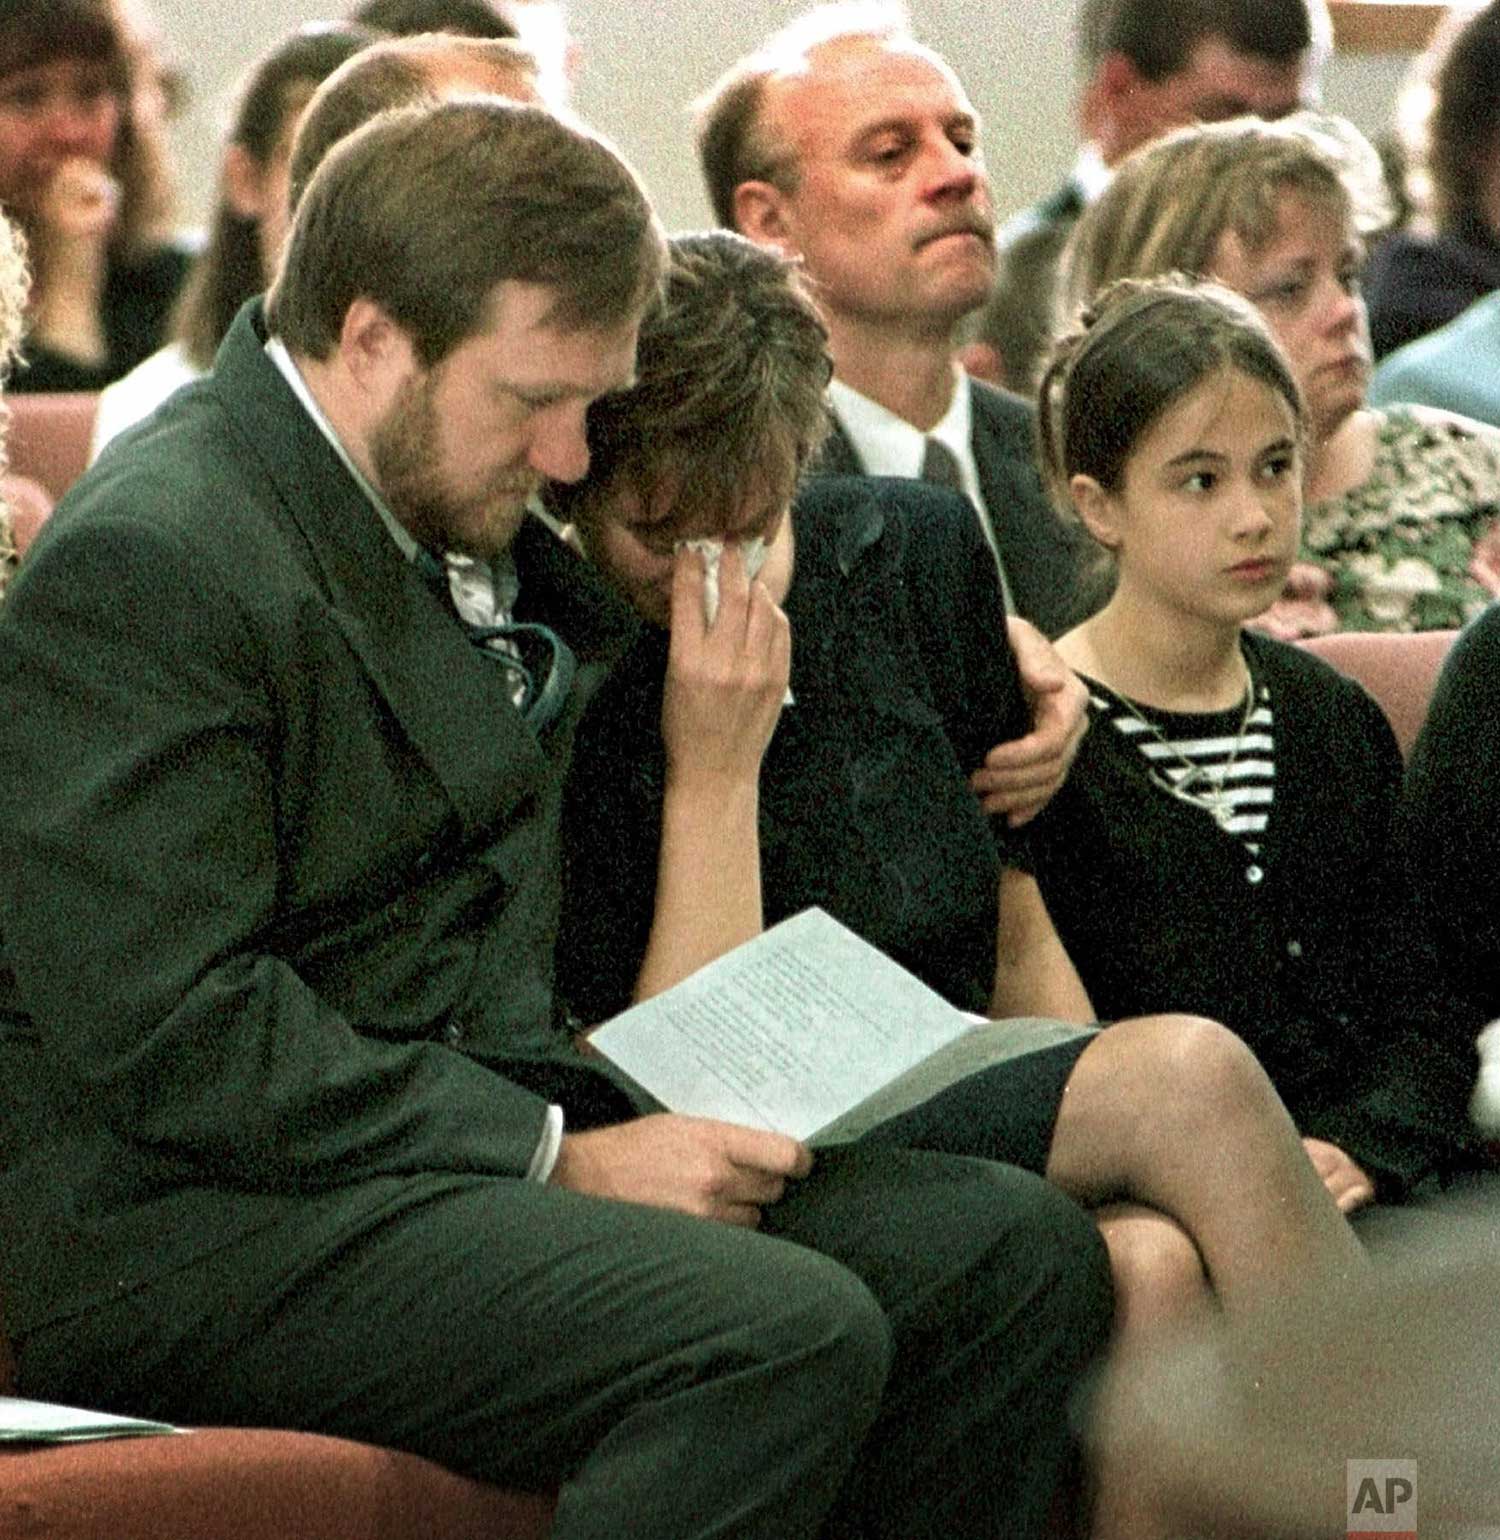  John Tomlin consoles his wife Doreen while their daughter Ashley watches the funeral of John Robert Tomlin at the Community United Methodist Church in Waterford, Wis., Wednesday, April 28, 1999. Tomlin was killed in the library at Columbine High Sch